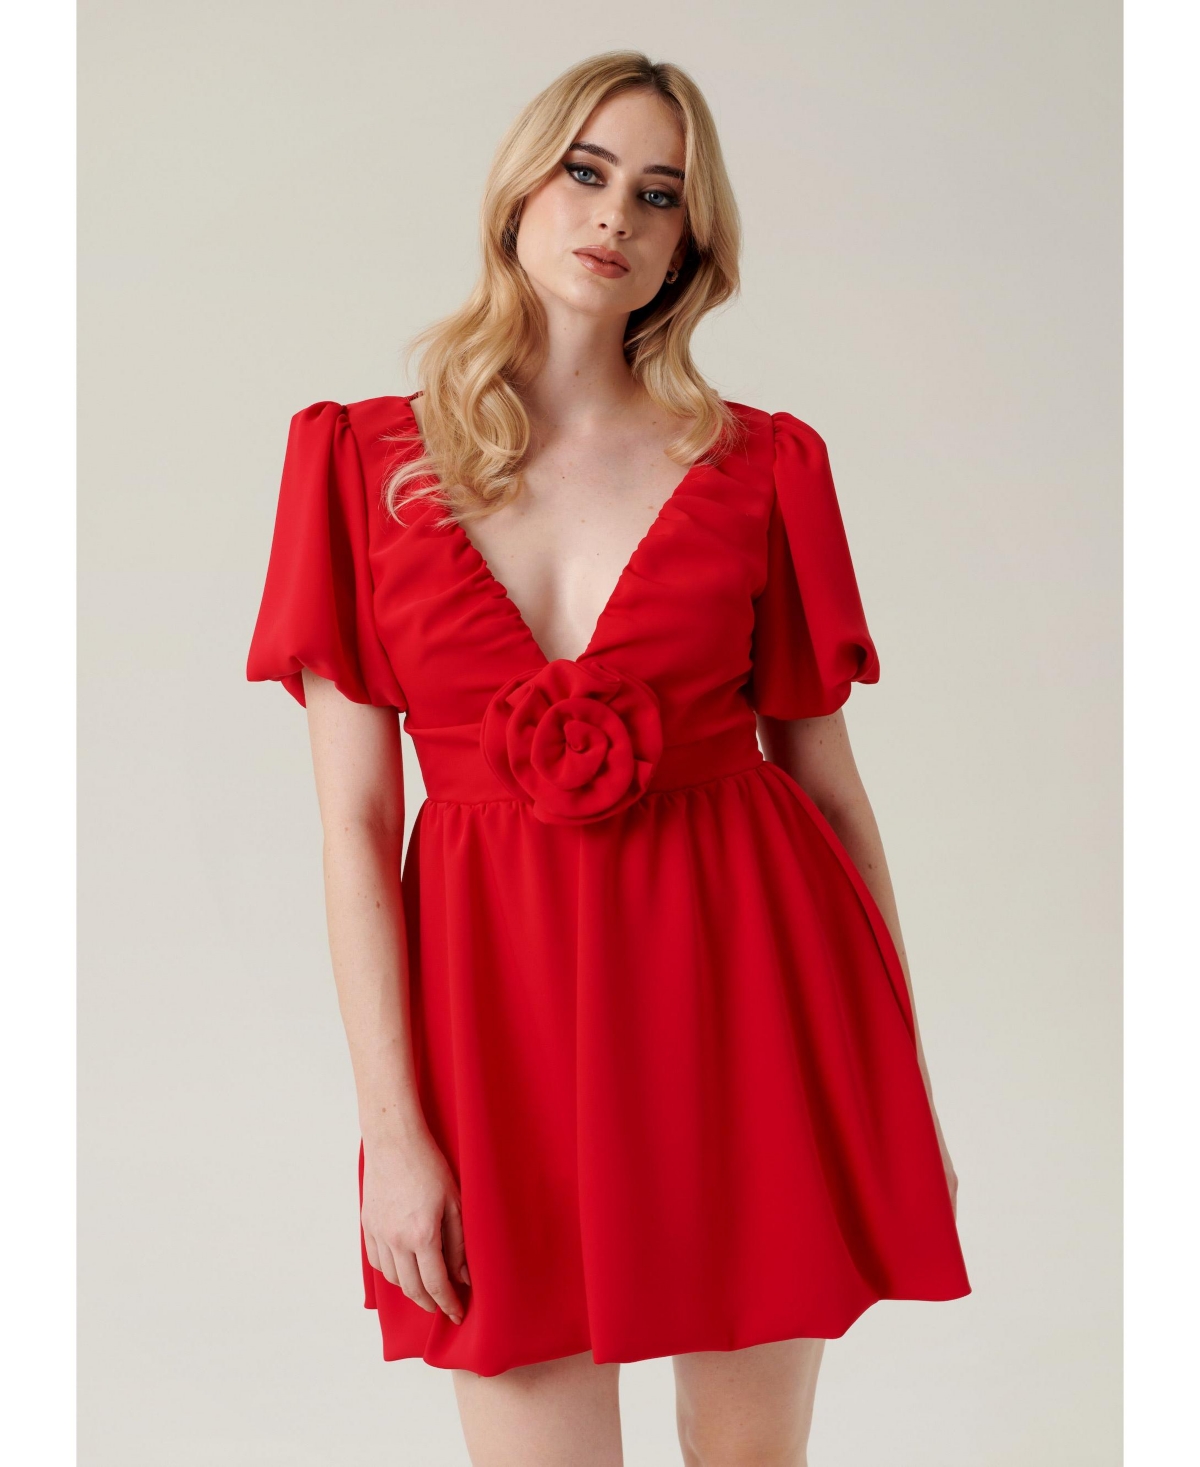 Women's Puffed Sleeve Mini Cocktail Dress with Rose Detail - Red